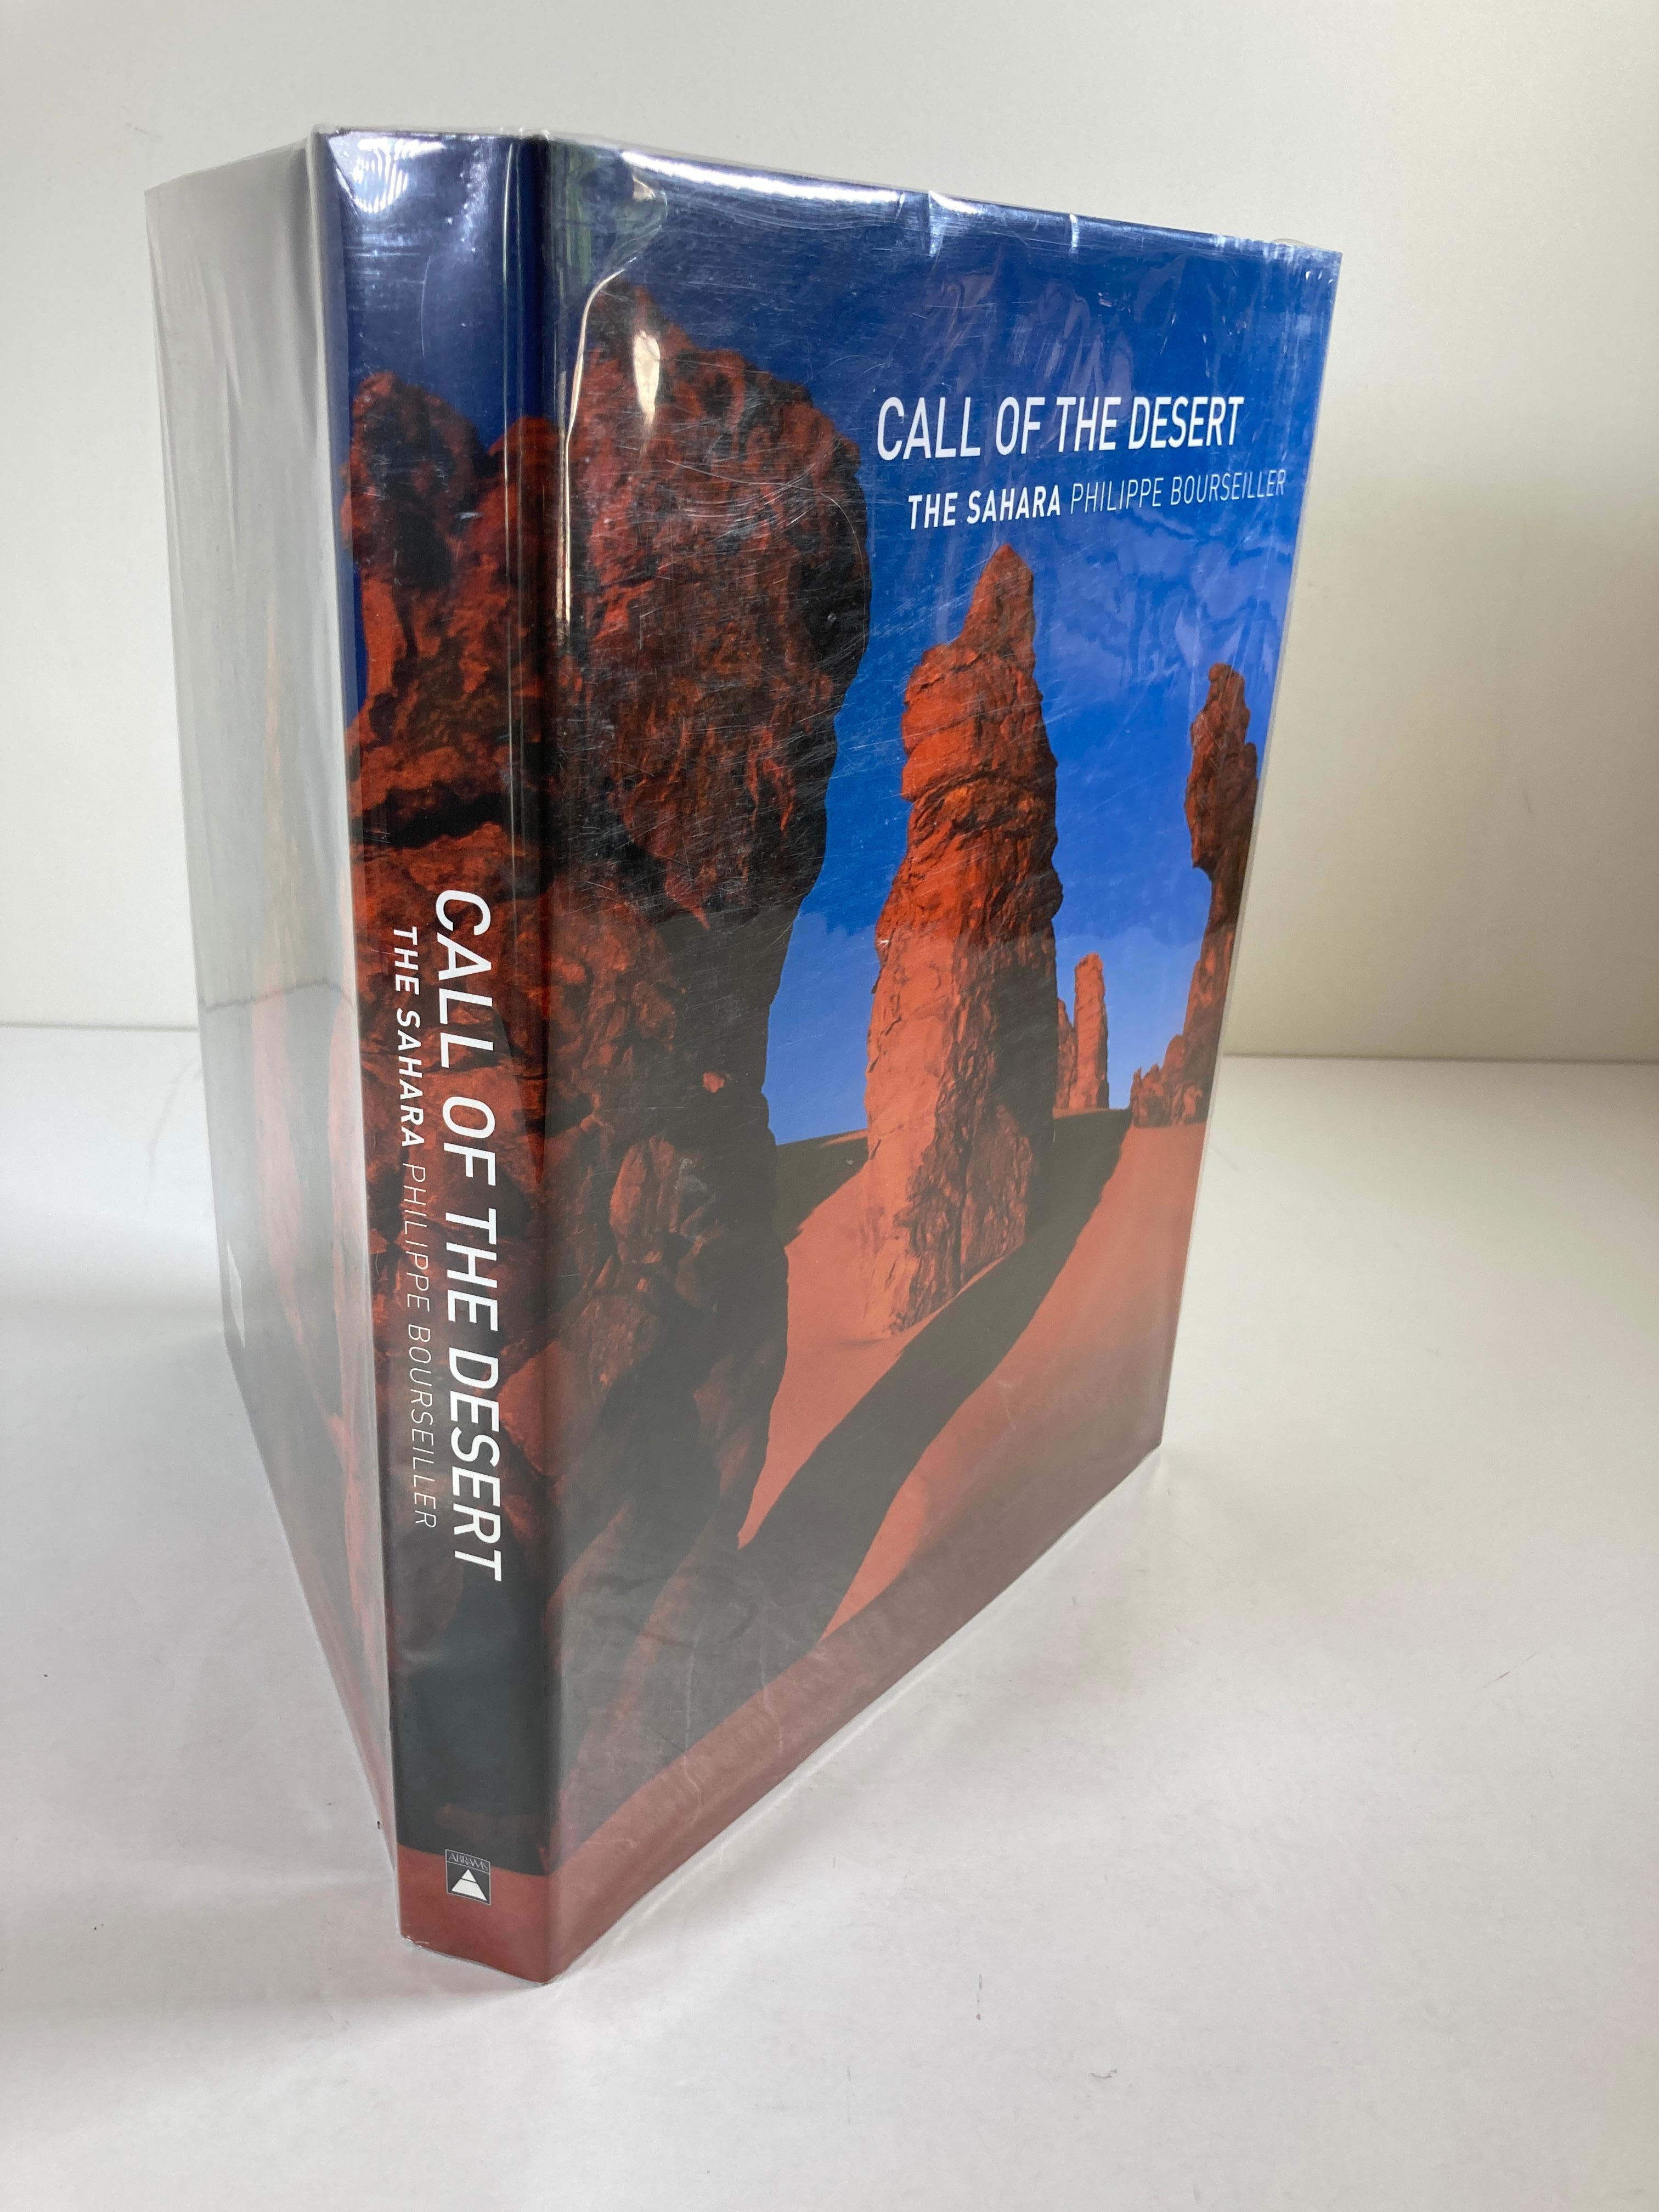 Call of the Desert: The Sahara Hardcover Book.
Philippe Bourseiller
Harry N. Abrams, Nov 1, 2004 - Nature - 424 pages
Photographer Bourseiller embarked on the first truly comprehensive photographic explorations of this enormous territory. Here in